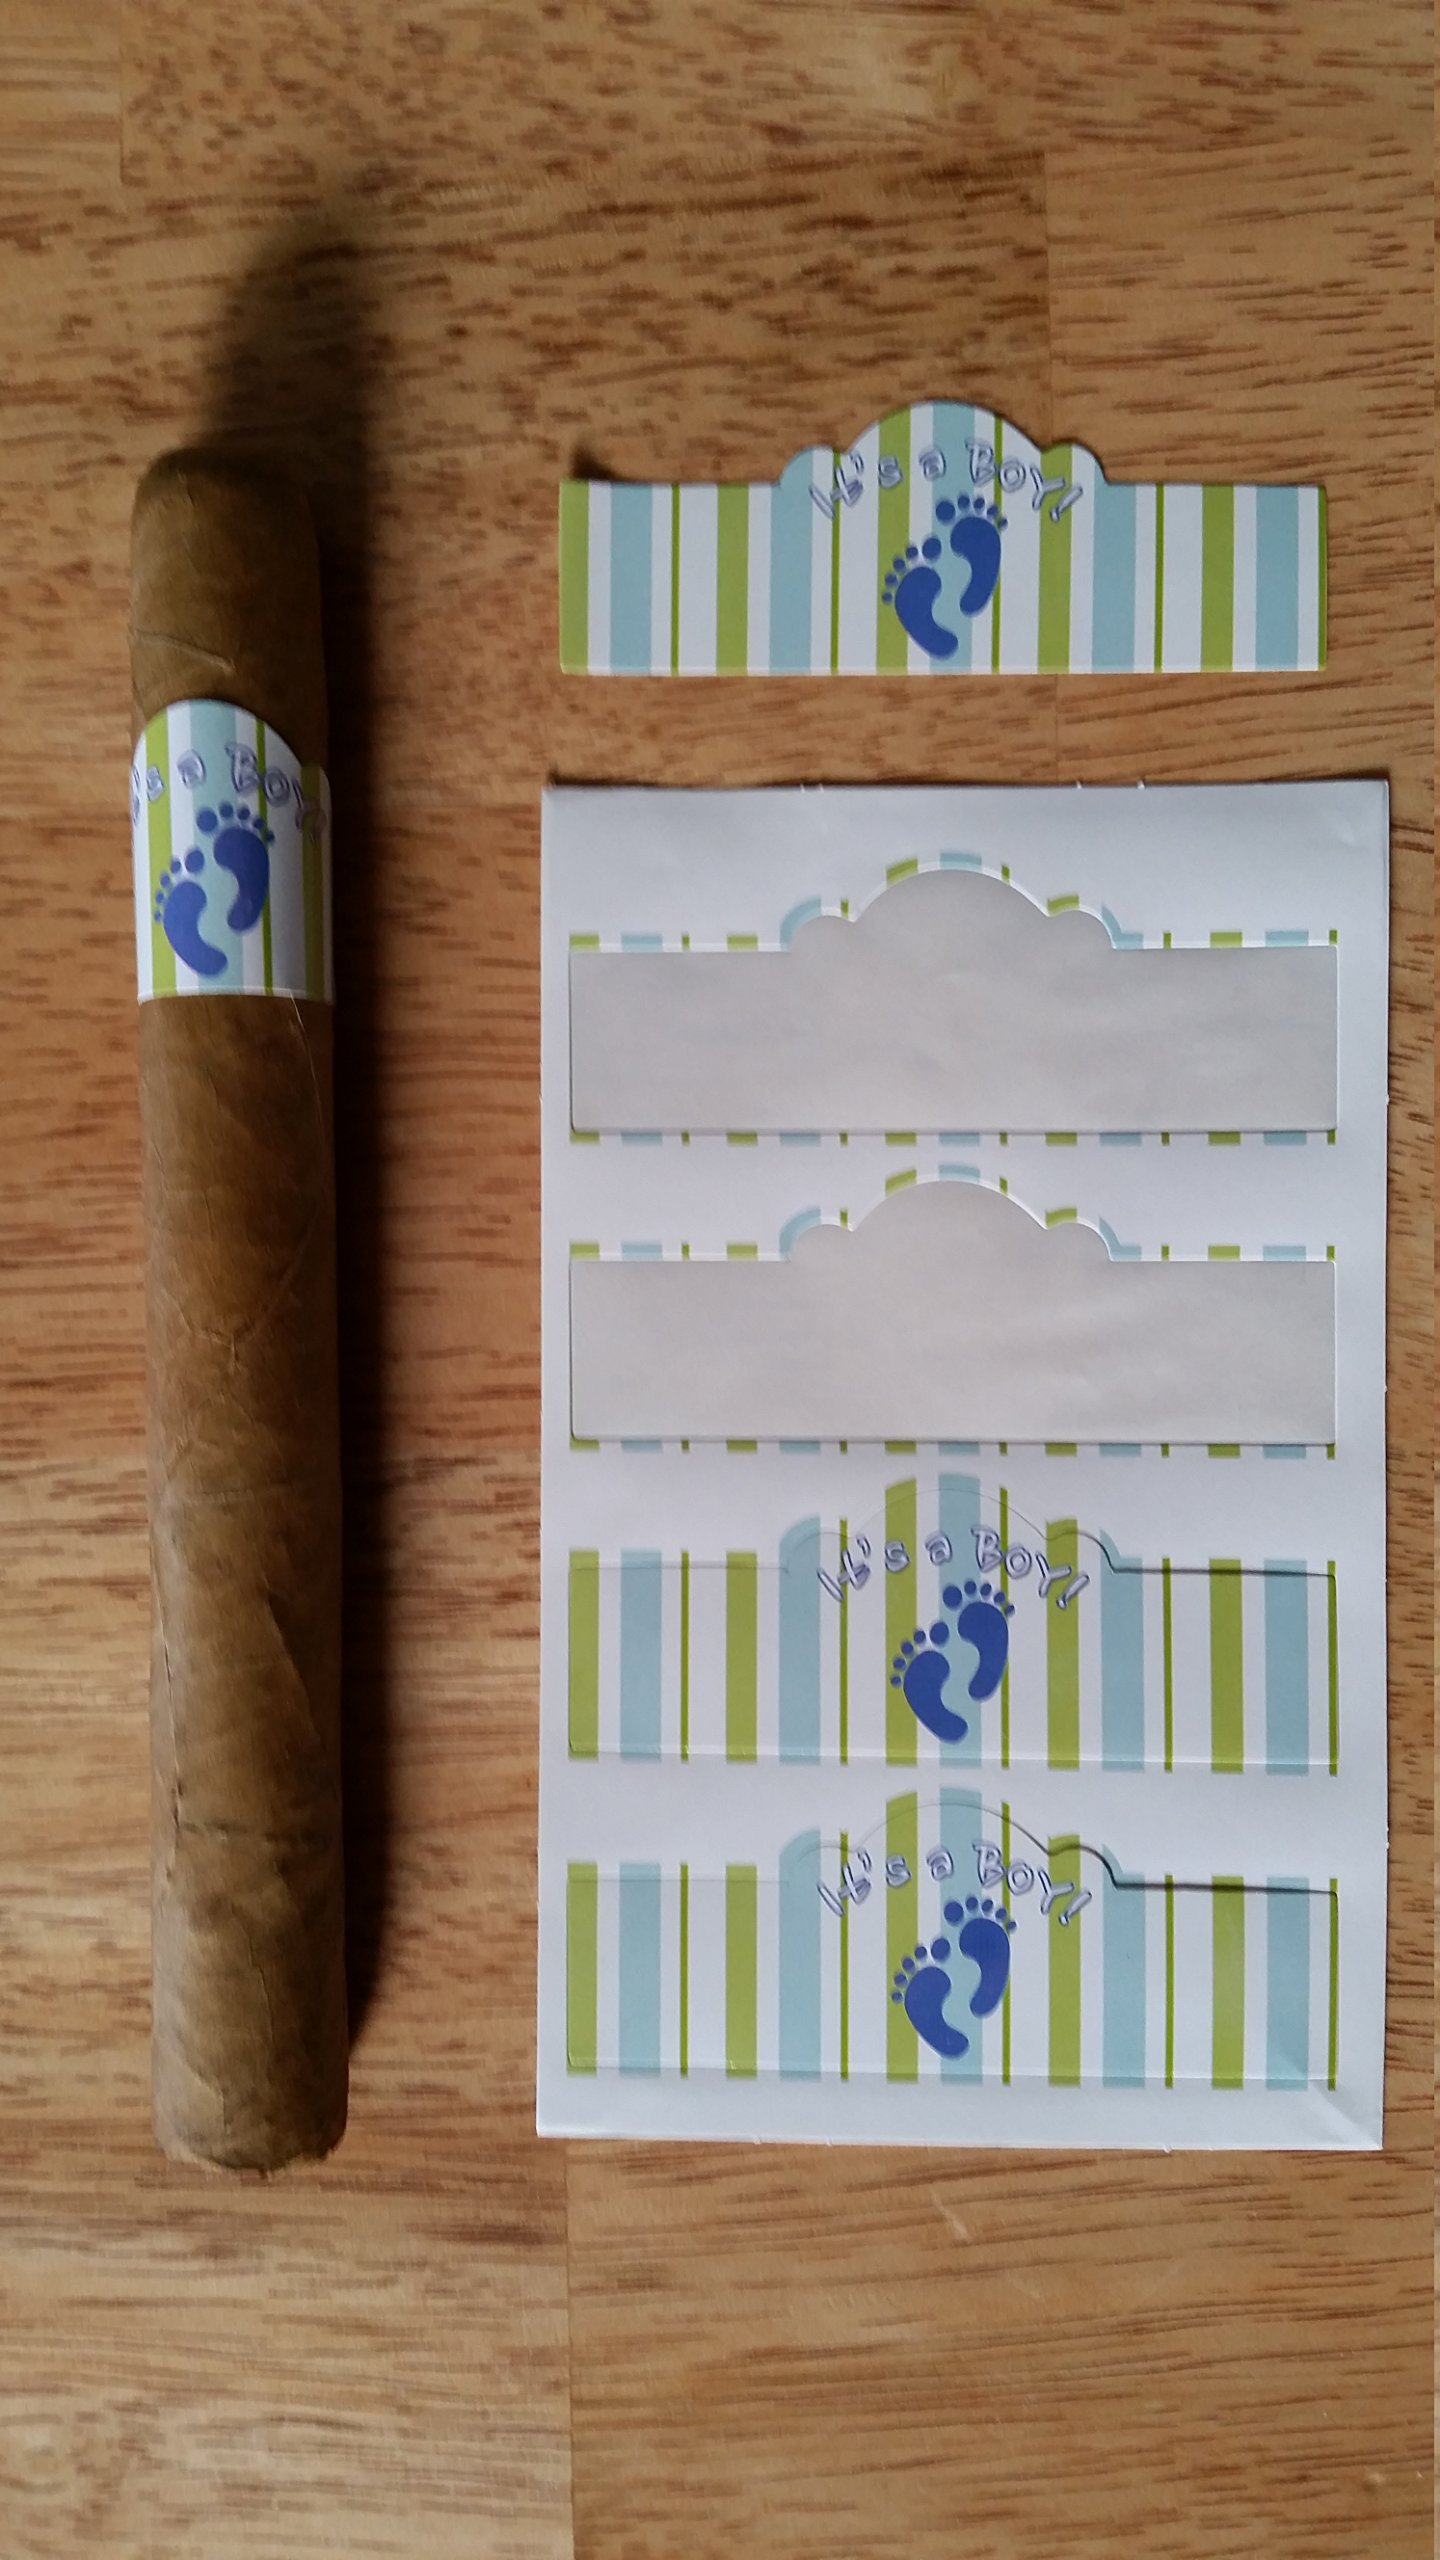 It's a BOY! (Baby Feet) 20 Pack of Self-Adhering Cigar Bands / Labels